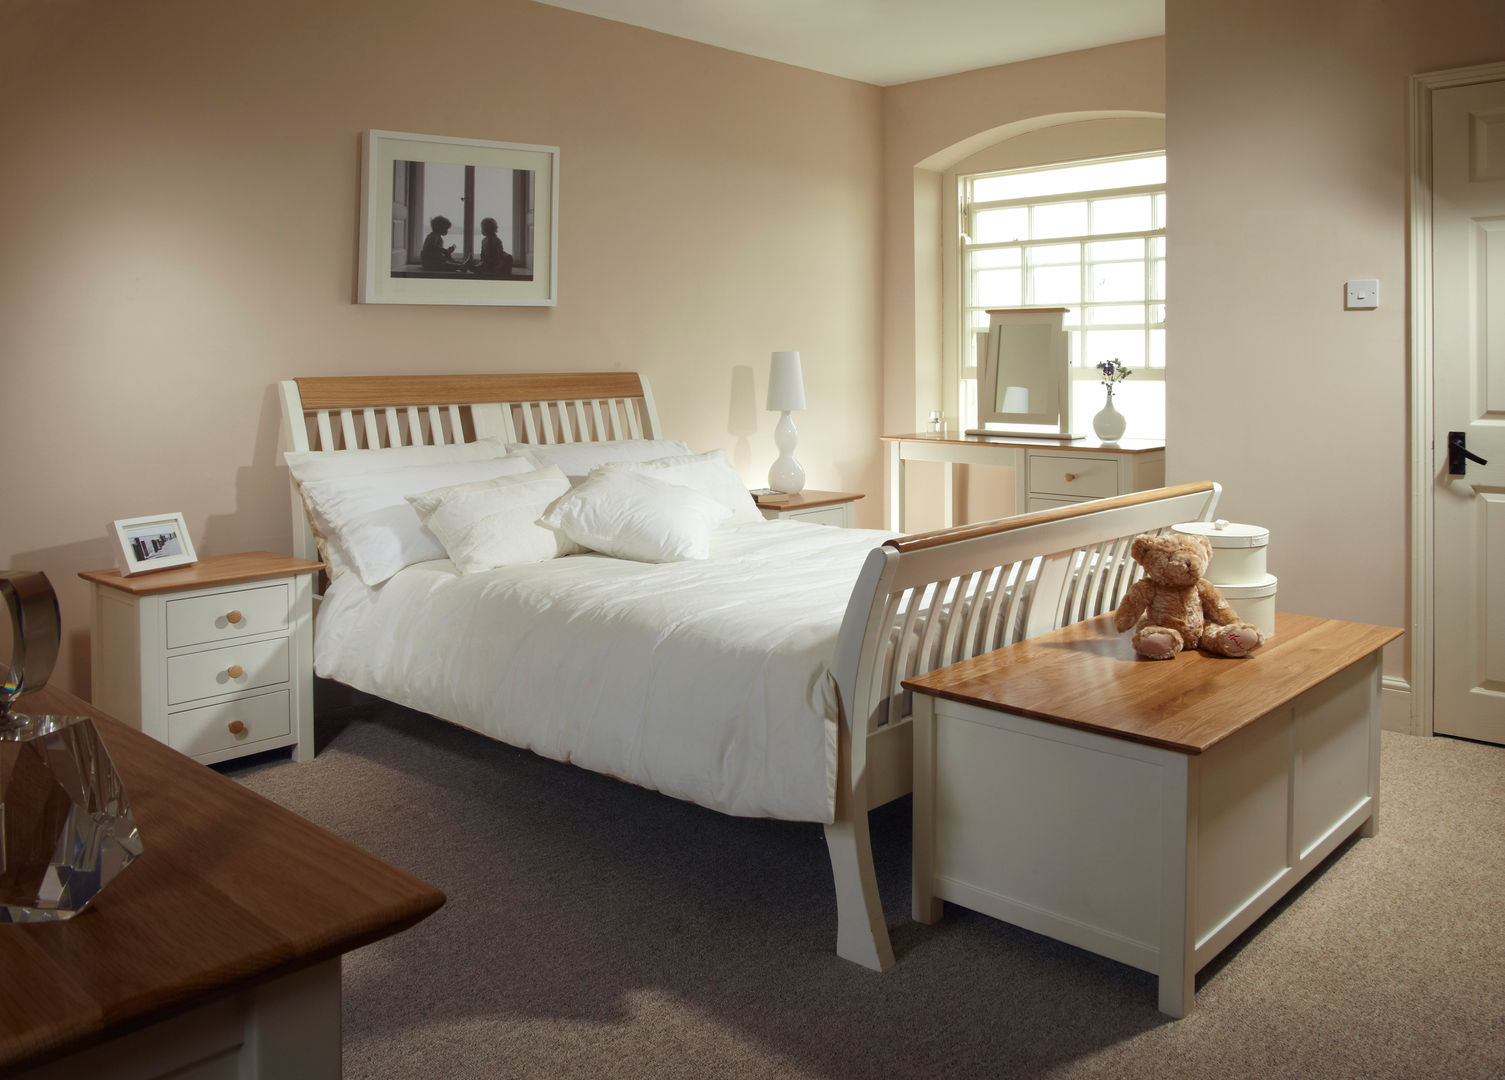 Cotsworld, The Painted Furniture Company The Painted Furniture Company Classic style bedroom Beds & headboards